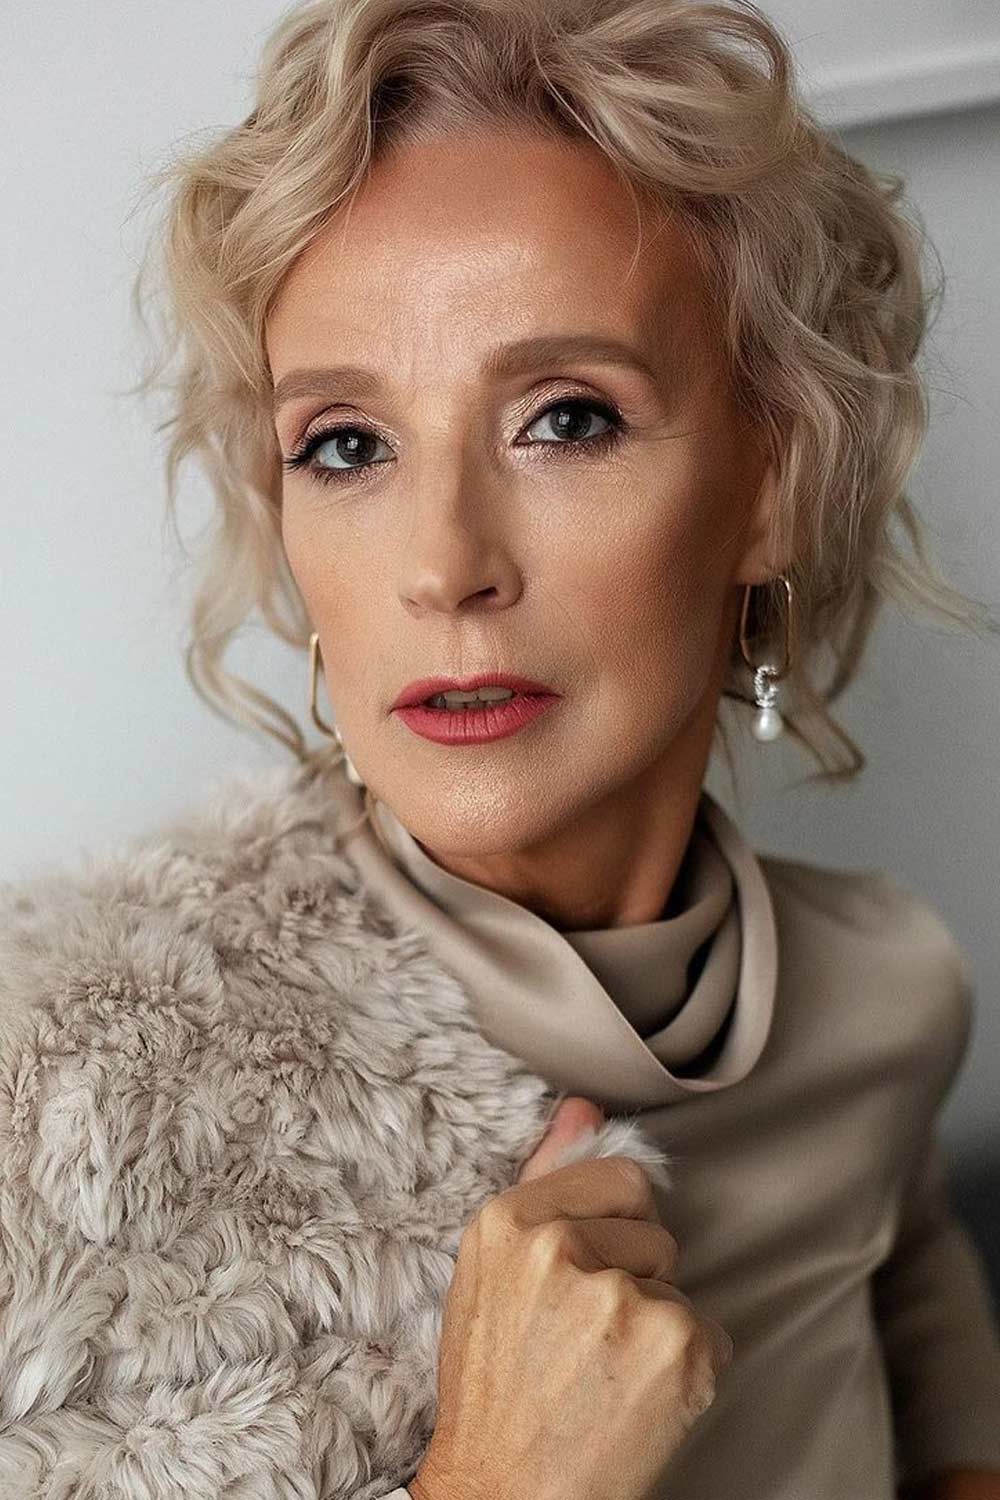 Makeup Idea for Older Women with Gold Eyeshadows